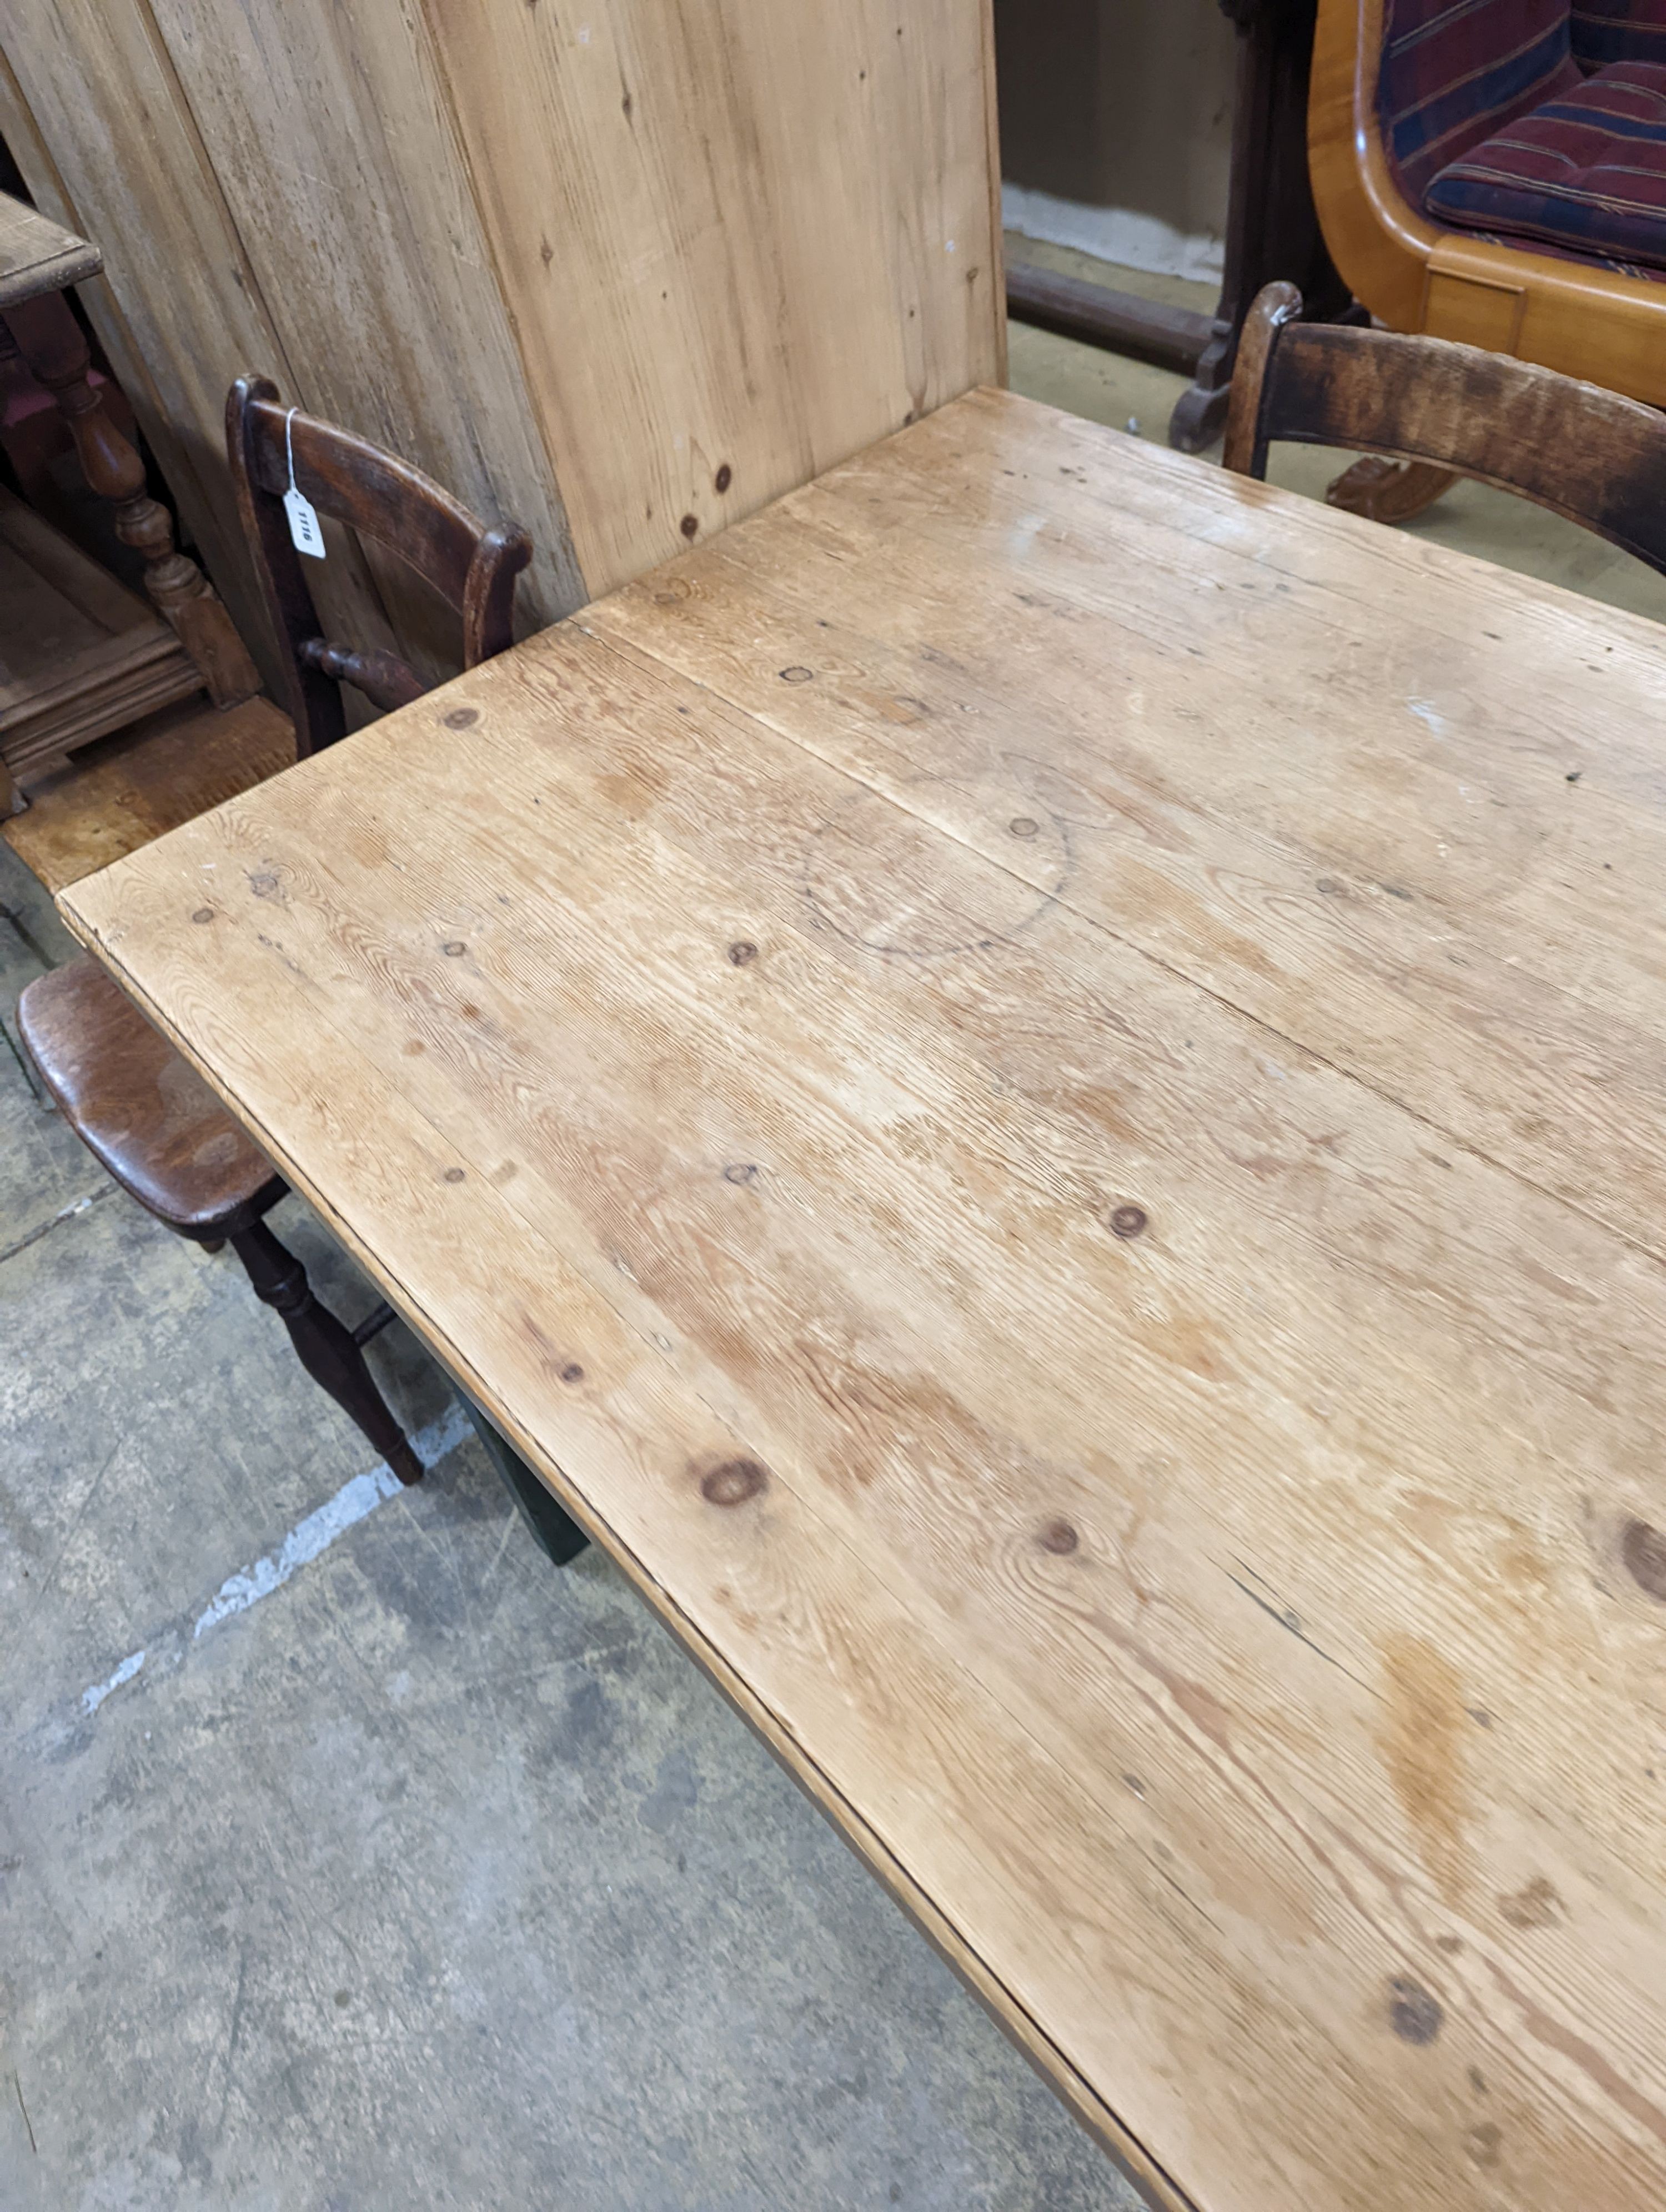 A rustic farmhouse pine kitchen table with painted legs, length 192cm, depth 85cm, height 76cm